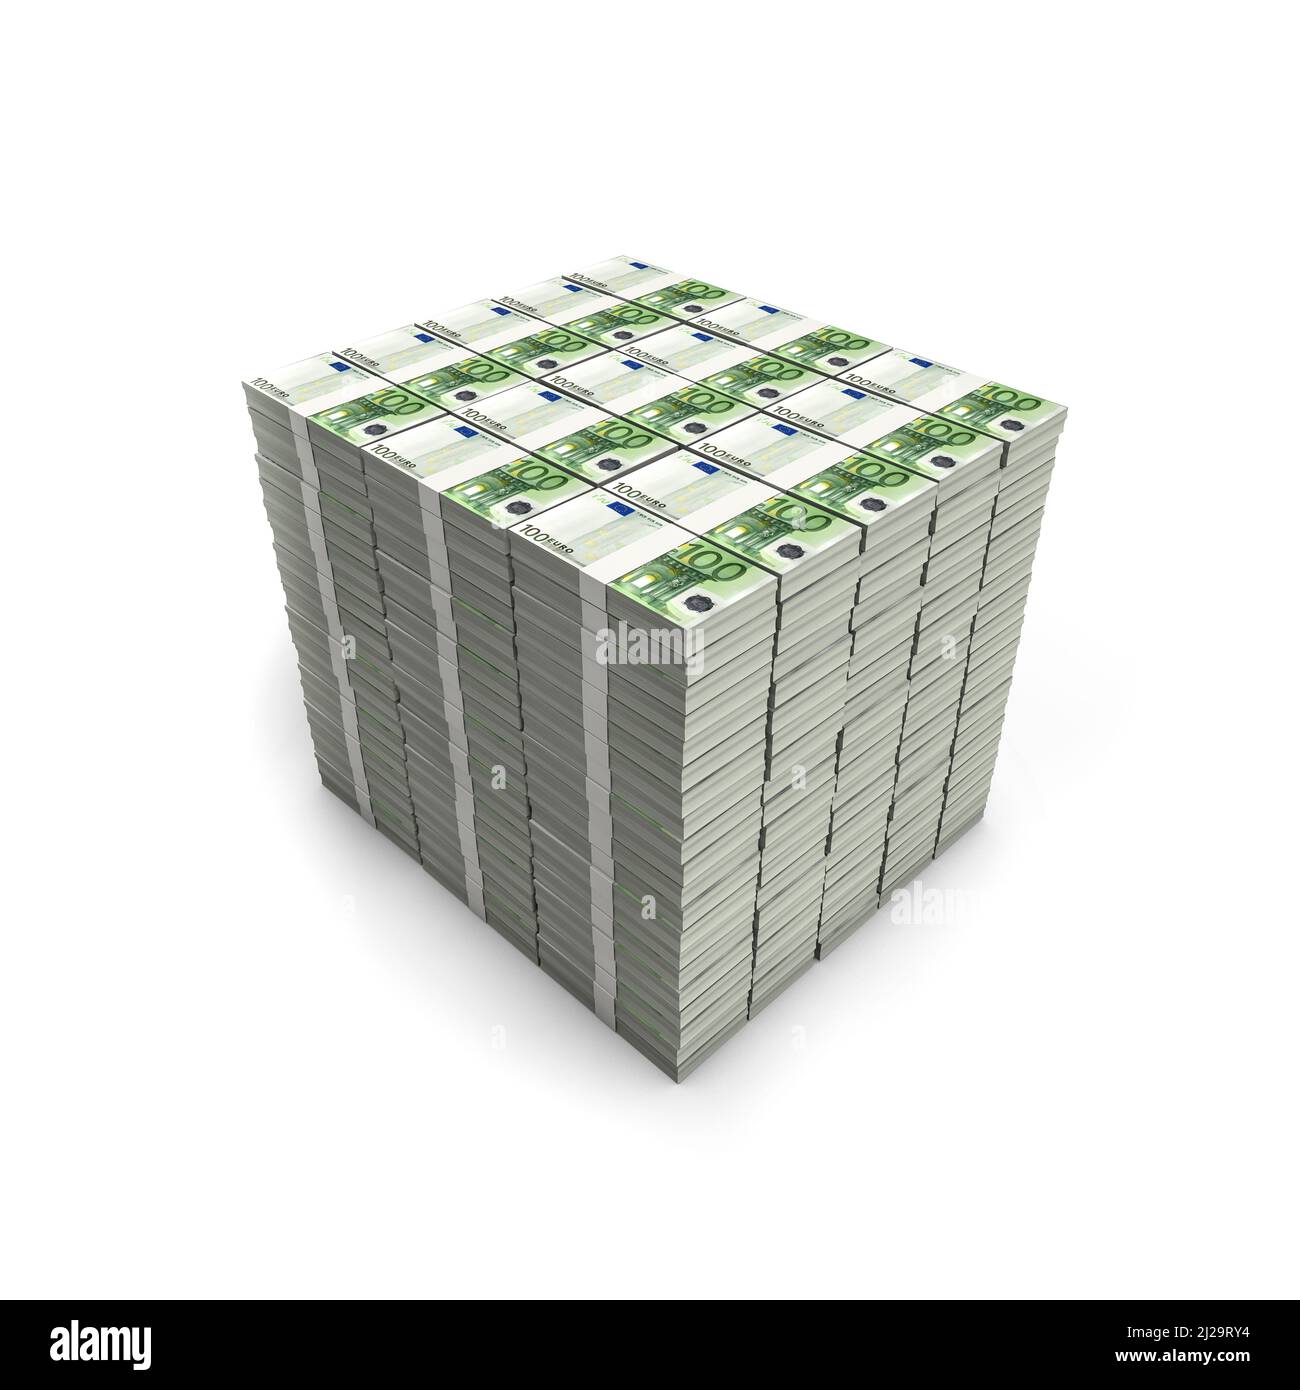 Millions of euros - 3D illustration of stacks of hundred euro banknotes isolated on white background Stock Photo